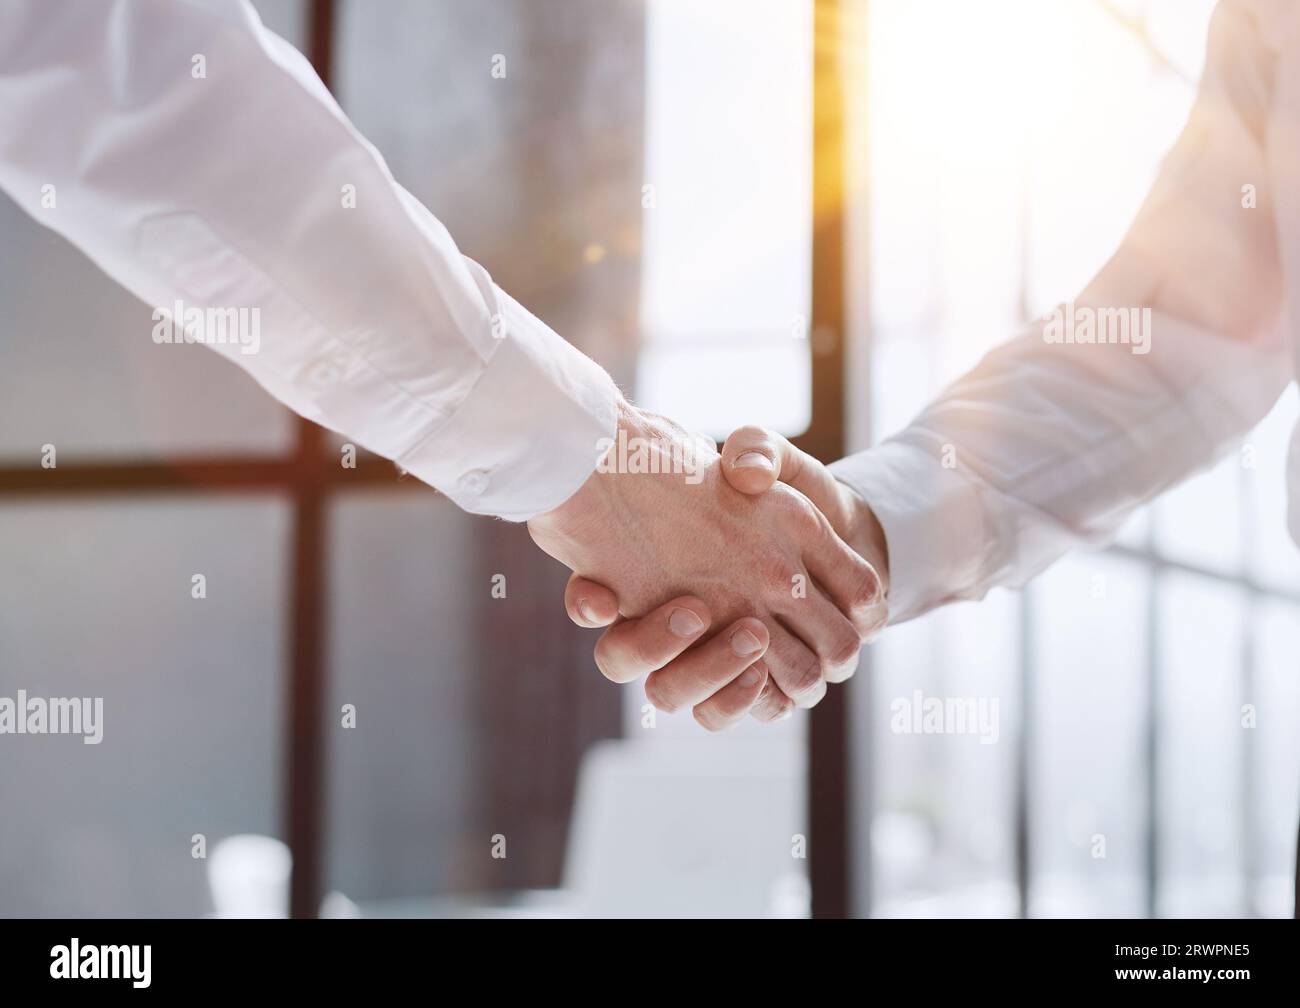 Two businessmen shake hands on the background of empty modern office, signing of a contract concept, close up Stock Photo